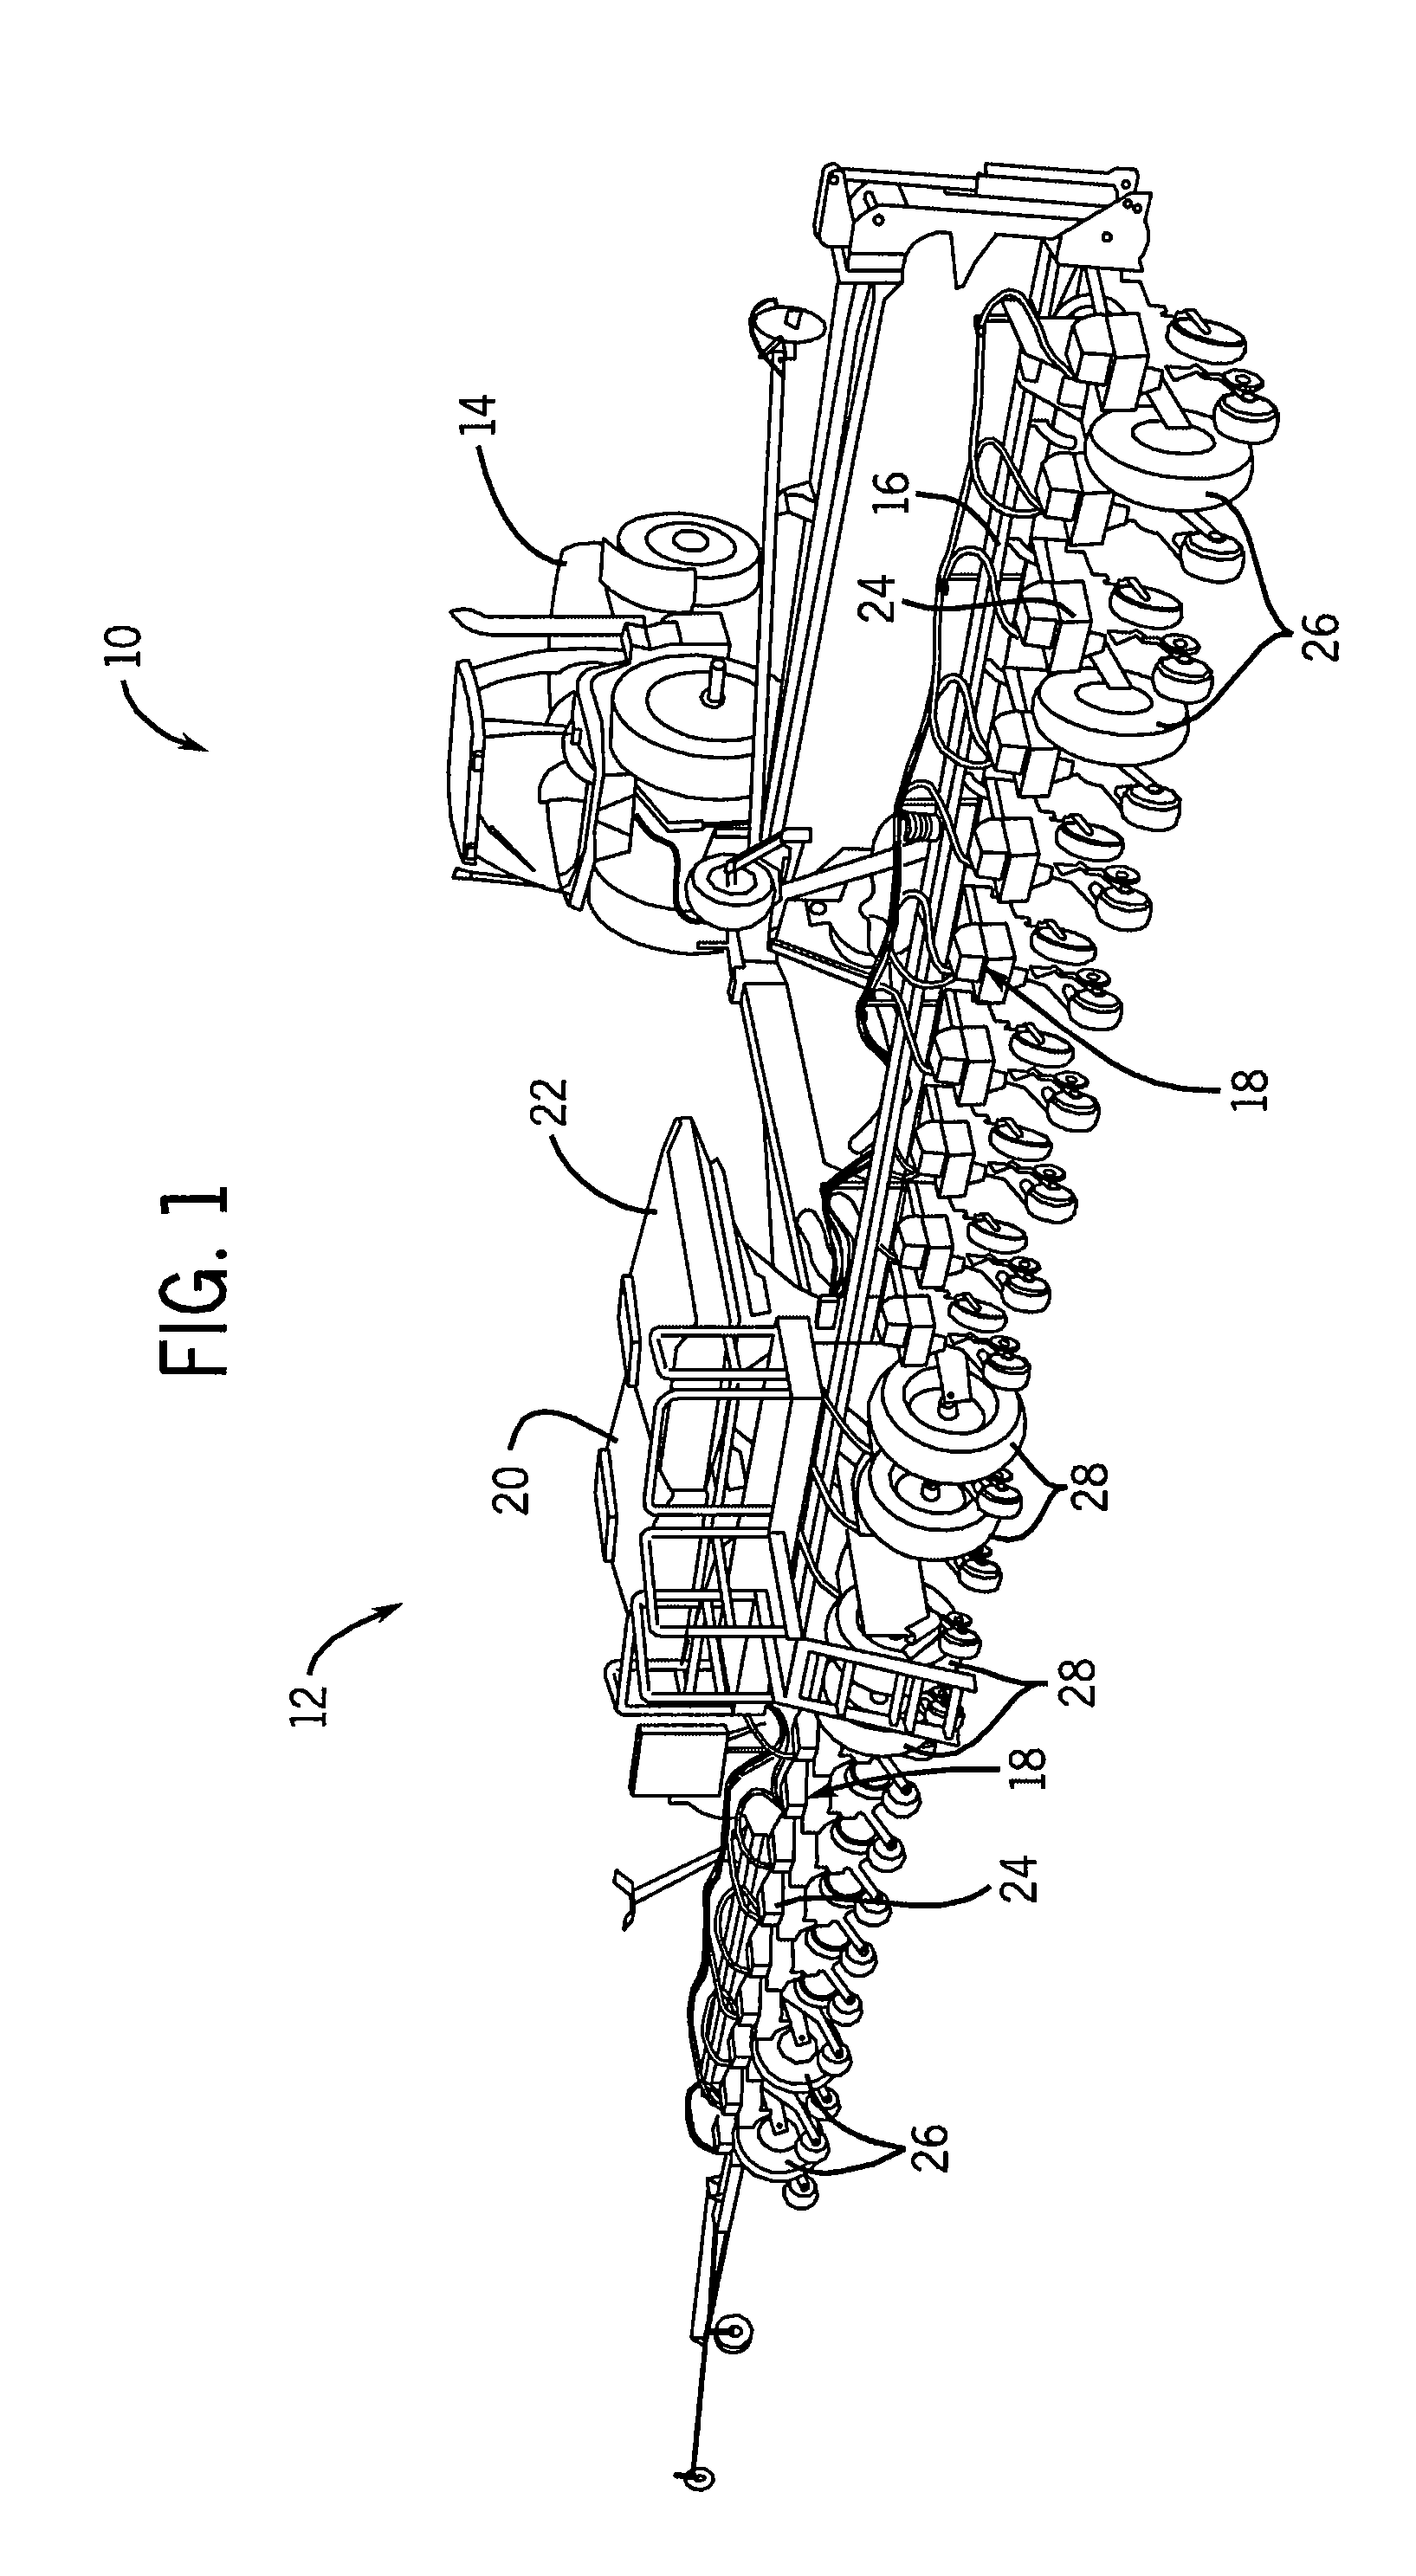 Towable Agricultural Implement Having Automatic Steering System